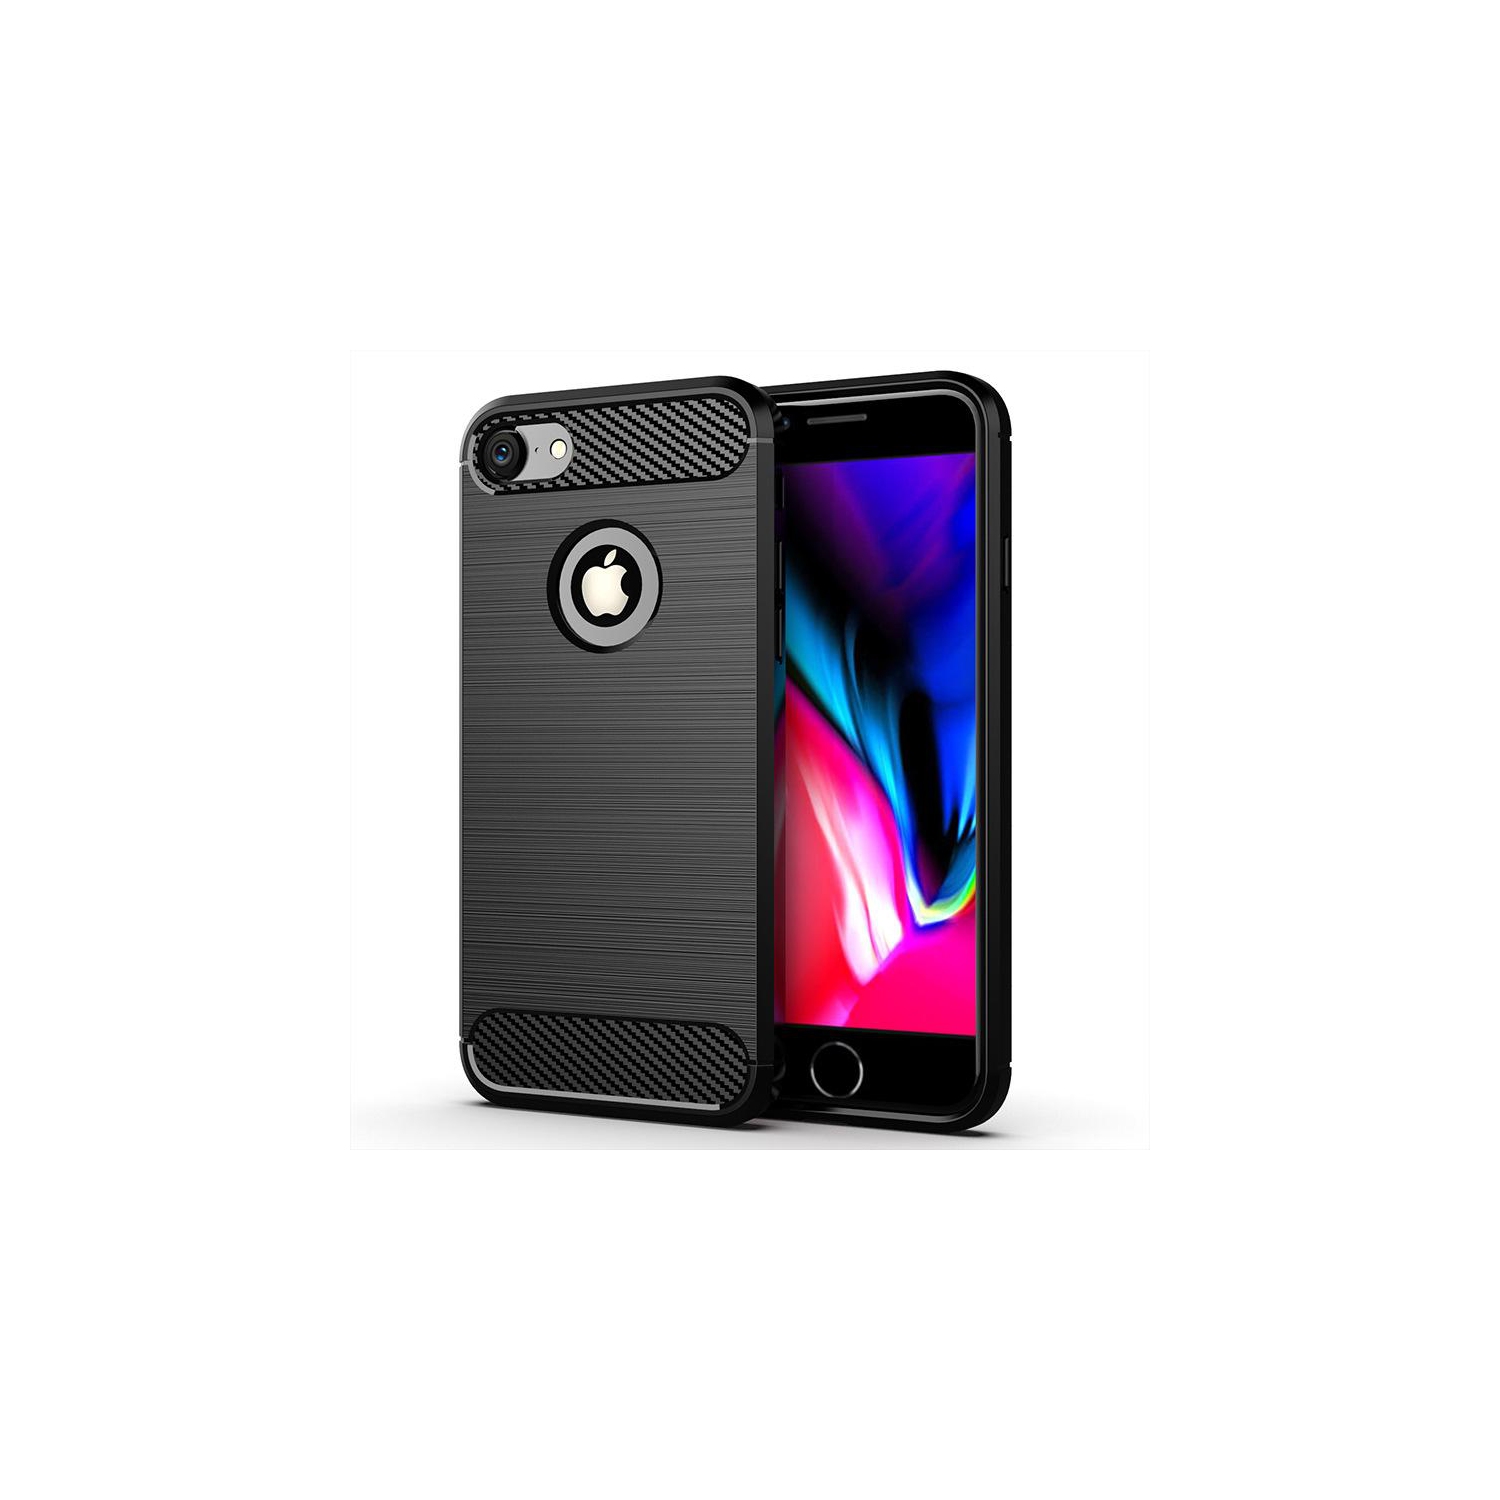 PANDACO Black Brushed Metal Case for iPhone 7 or iPhone 8 or iPhone SE (2020/2022)